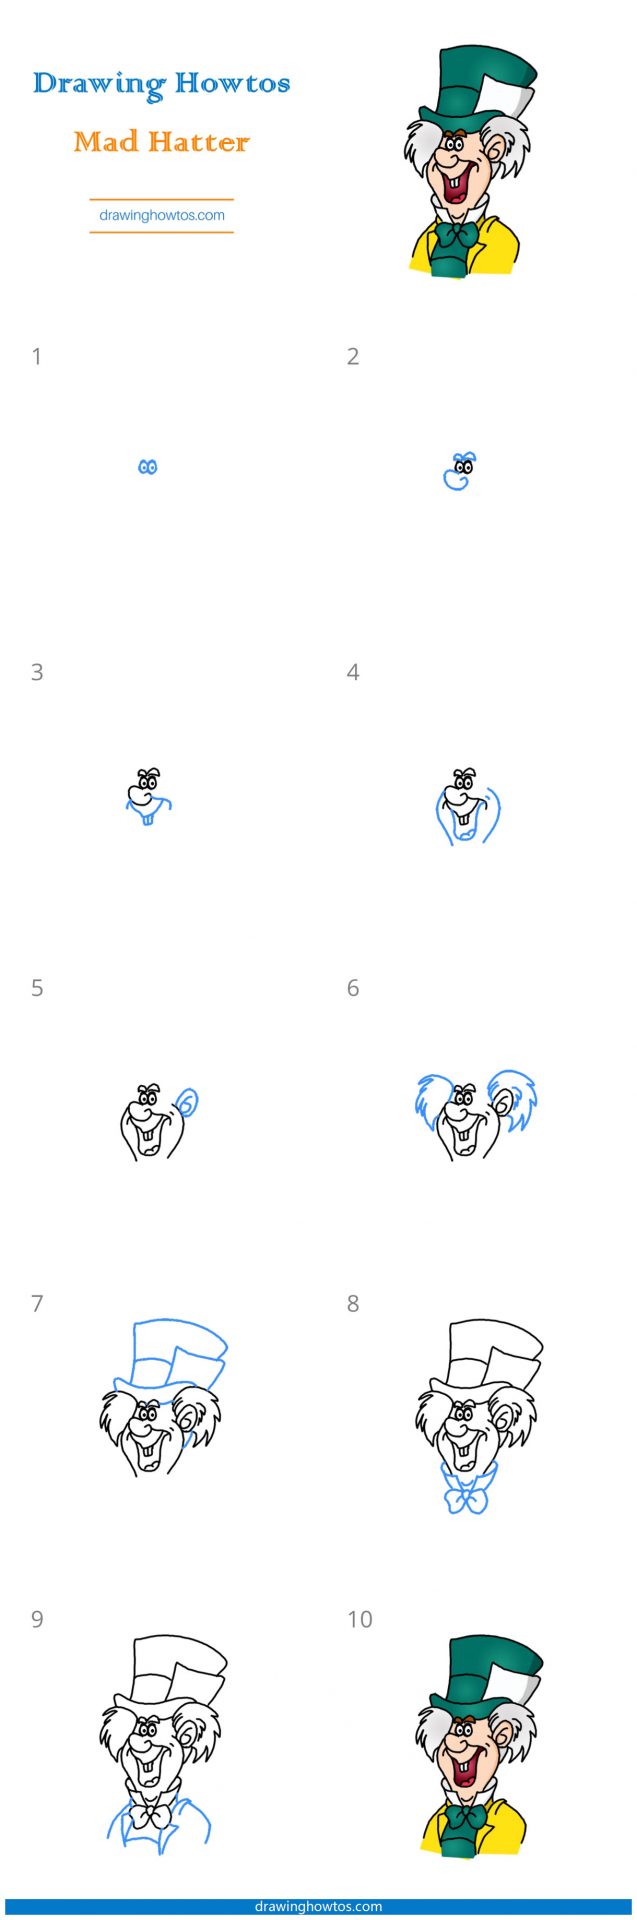 How to Draw Mad Hatter Step by Step